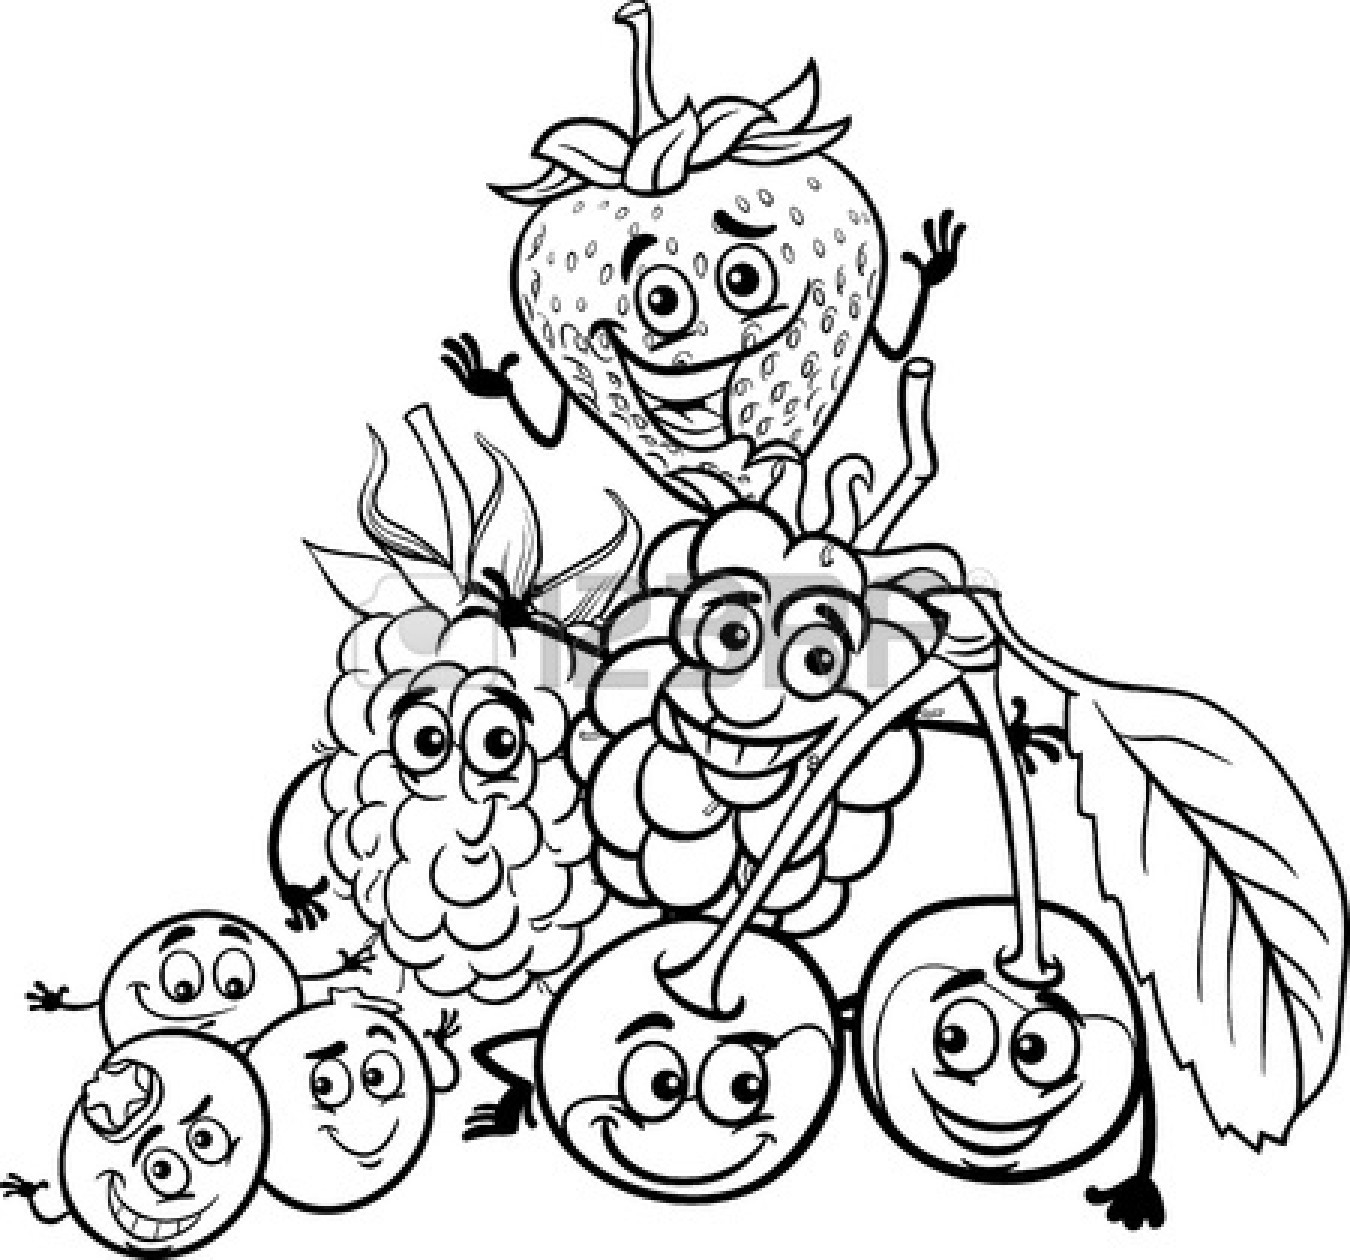 free black and white fruit clipart - photo #39